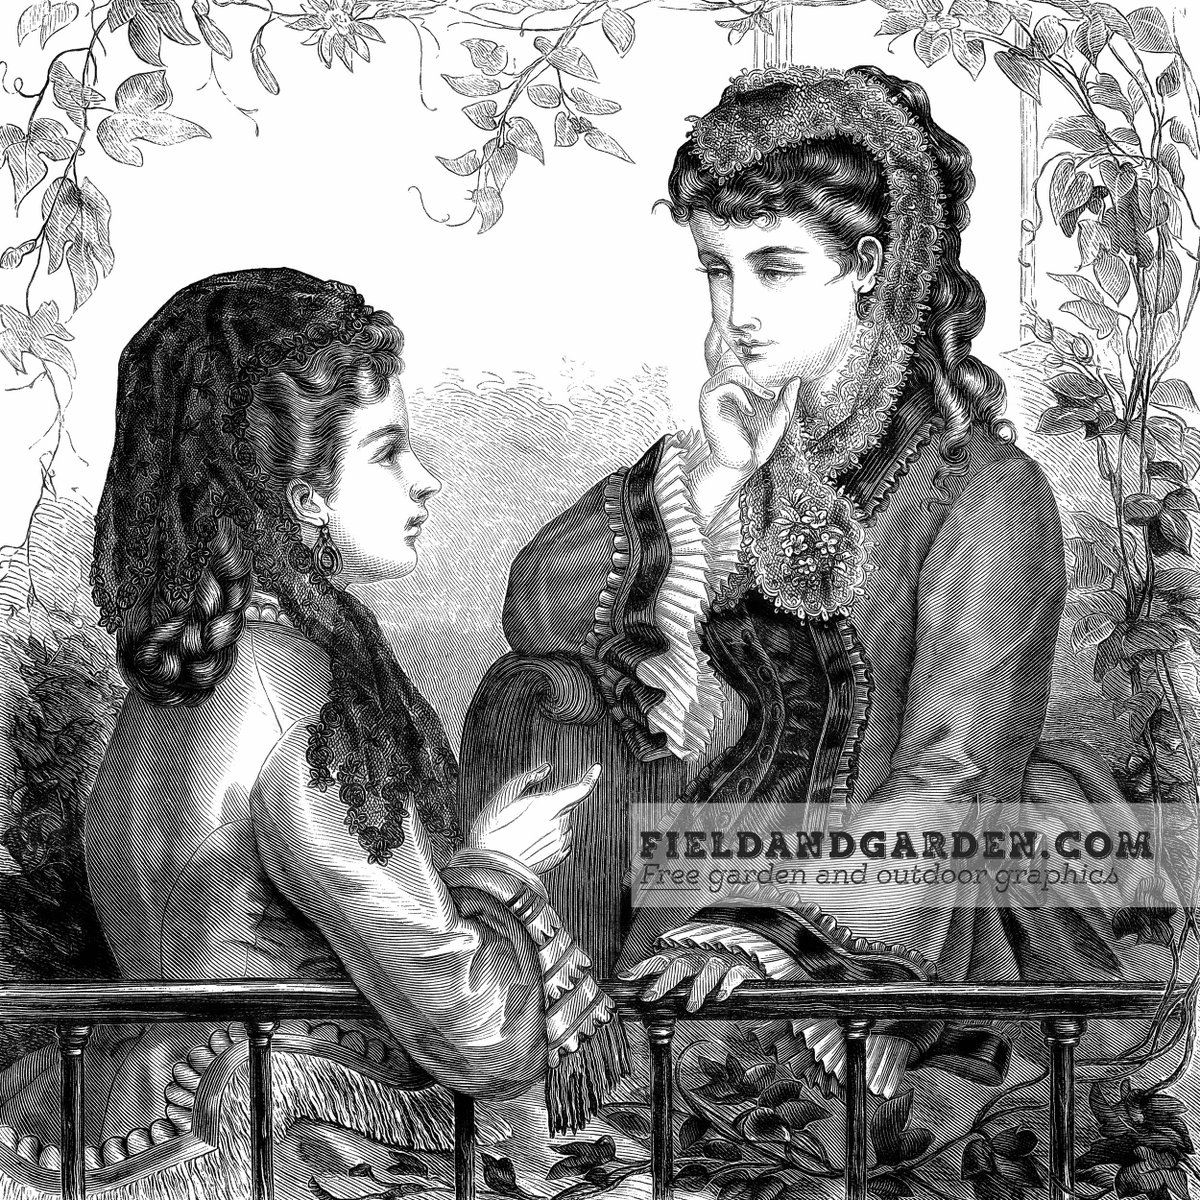 Vintage illustration of two Victorian ladies chatting in a garden. #Freeclipart for #collageart, #papercrafts, #scrapbooking or DIY #wallart at bit.ly/47tZjoI.
|| #fieldandgarden #vintageart #vintageprint